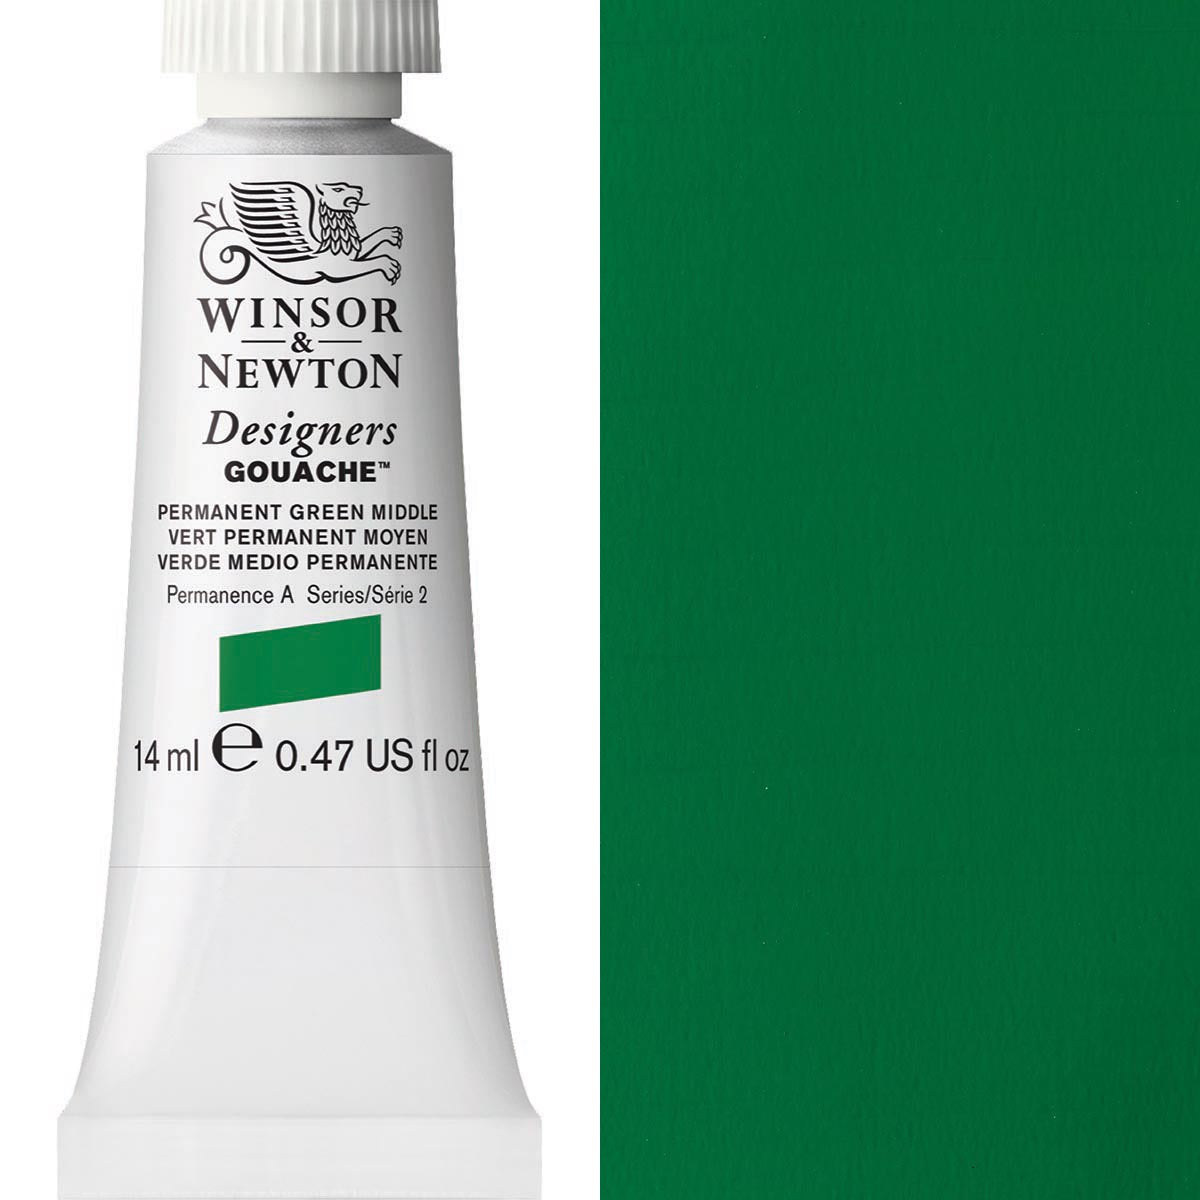 Winsor and Newton - Designers Gouache - 14ml - Permanent Green Middle